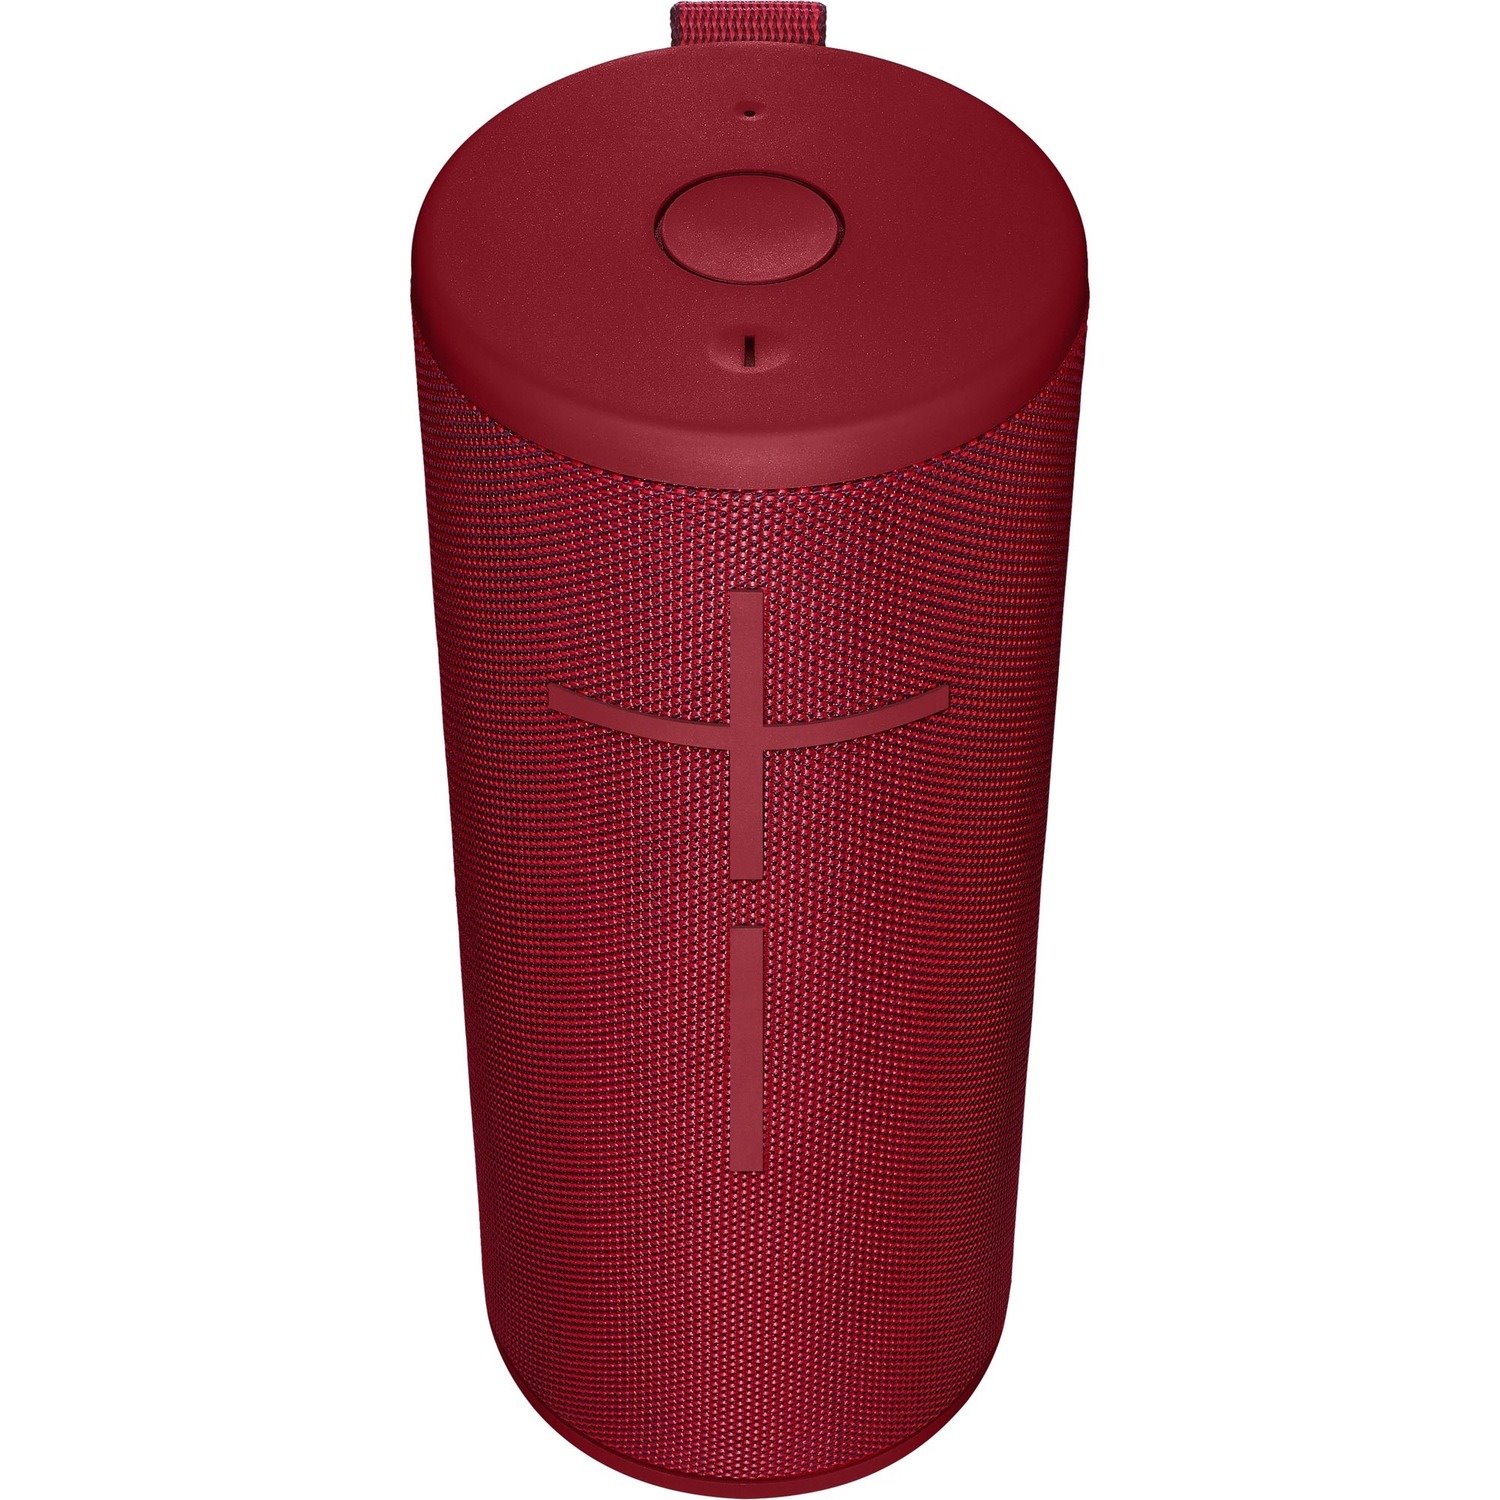 Ultimate Ears BOOM 3 Portable Bluetooth Speaker System - Sunset Red